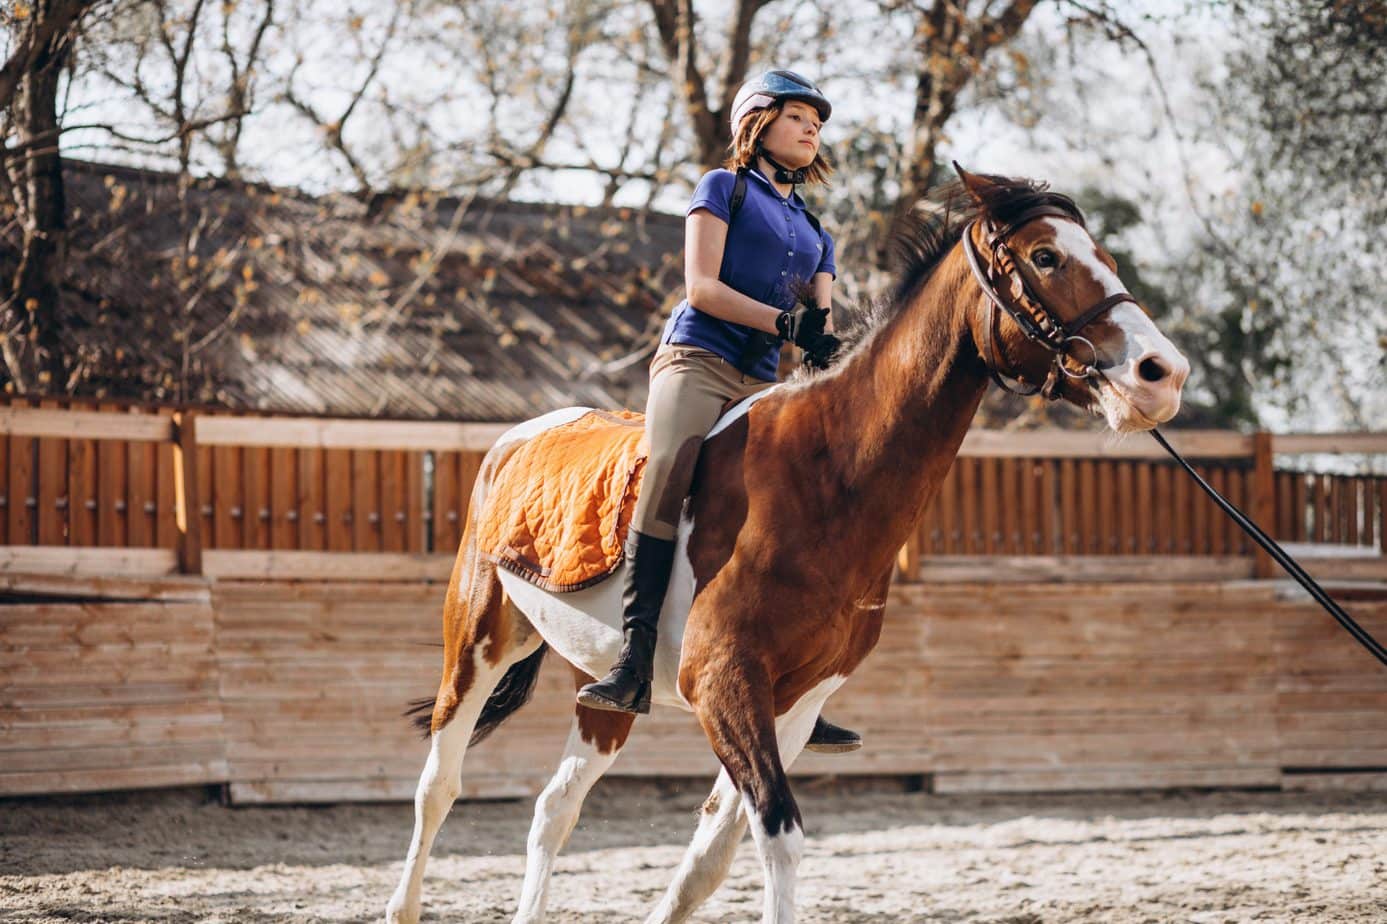 Riding on a lunge – is it really boring and tedious?